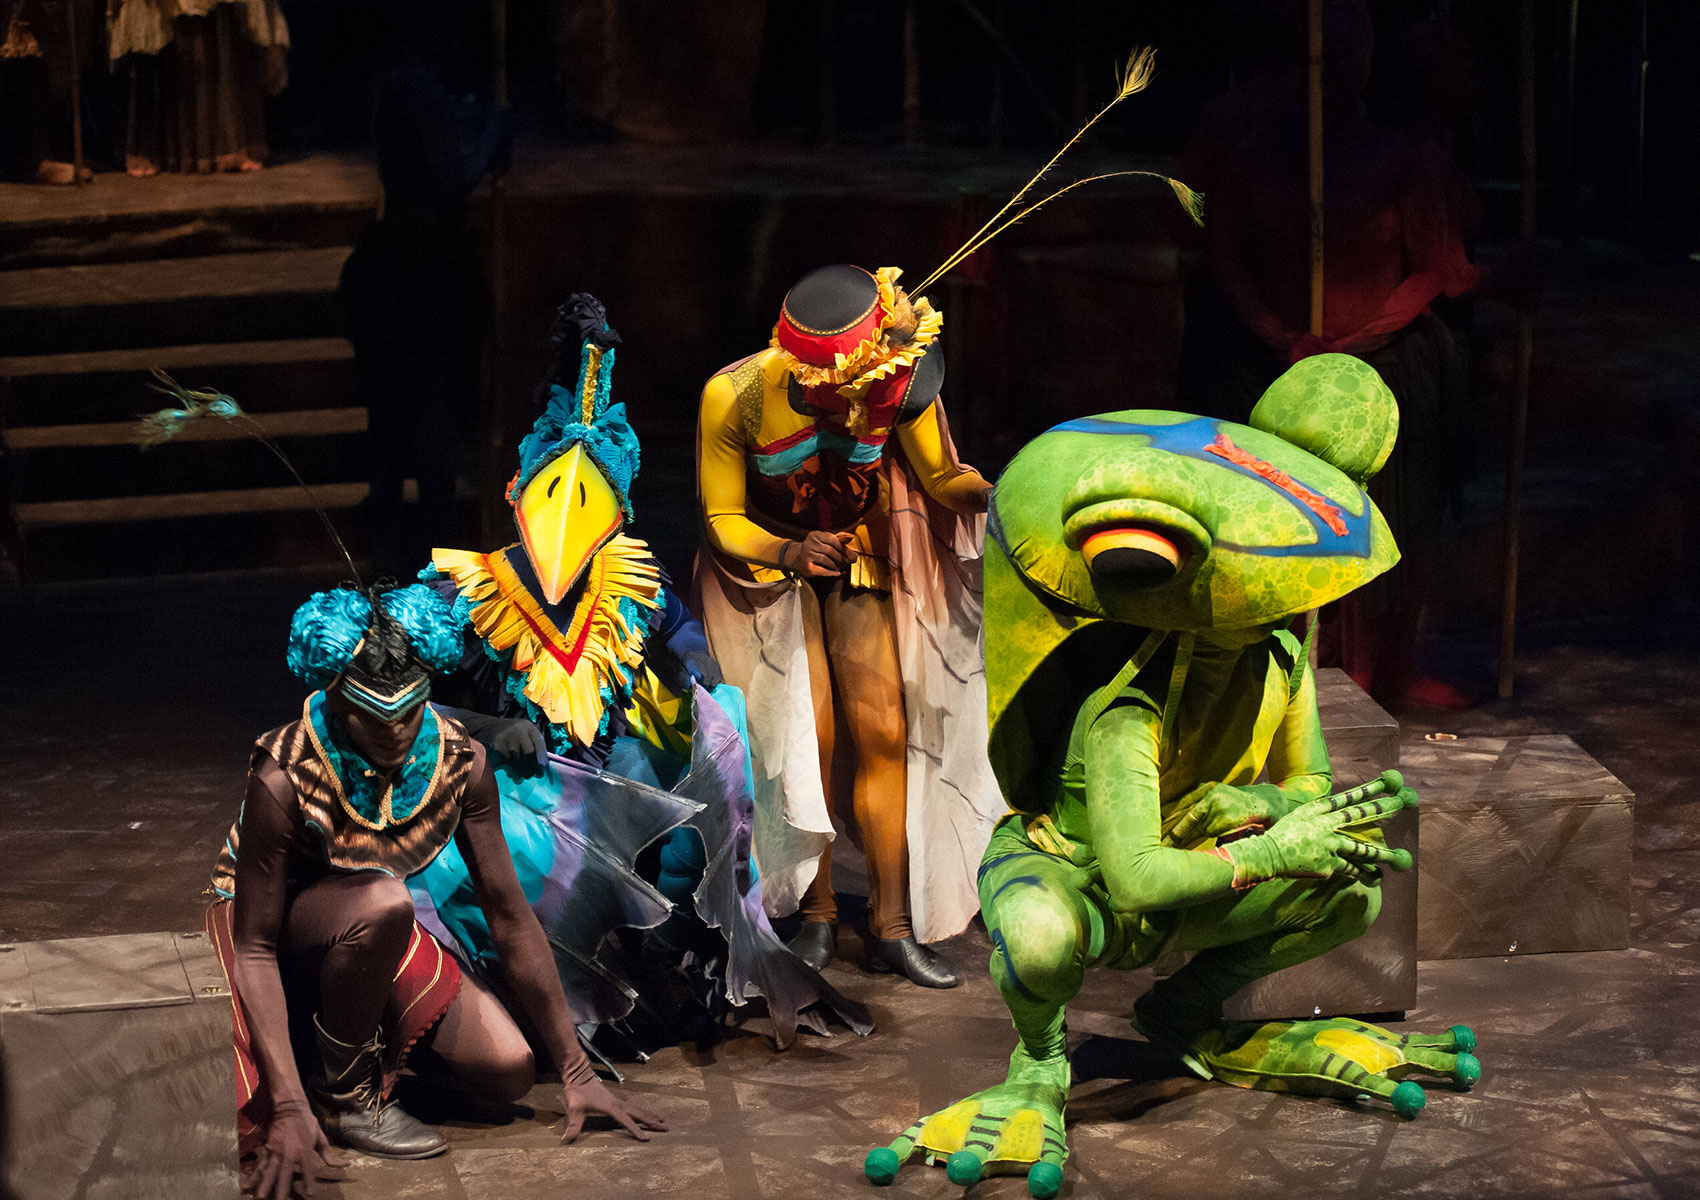 A group of four characters are grouped onstage, one dressed as a bird, one as a frog, and the other two are dressed as creatures that resemble insects or birds of some kind by wearing vibrant colors and feathery antennae appendages.